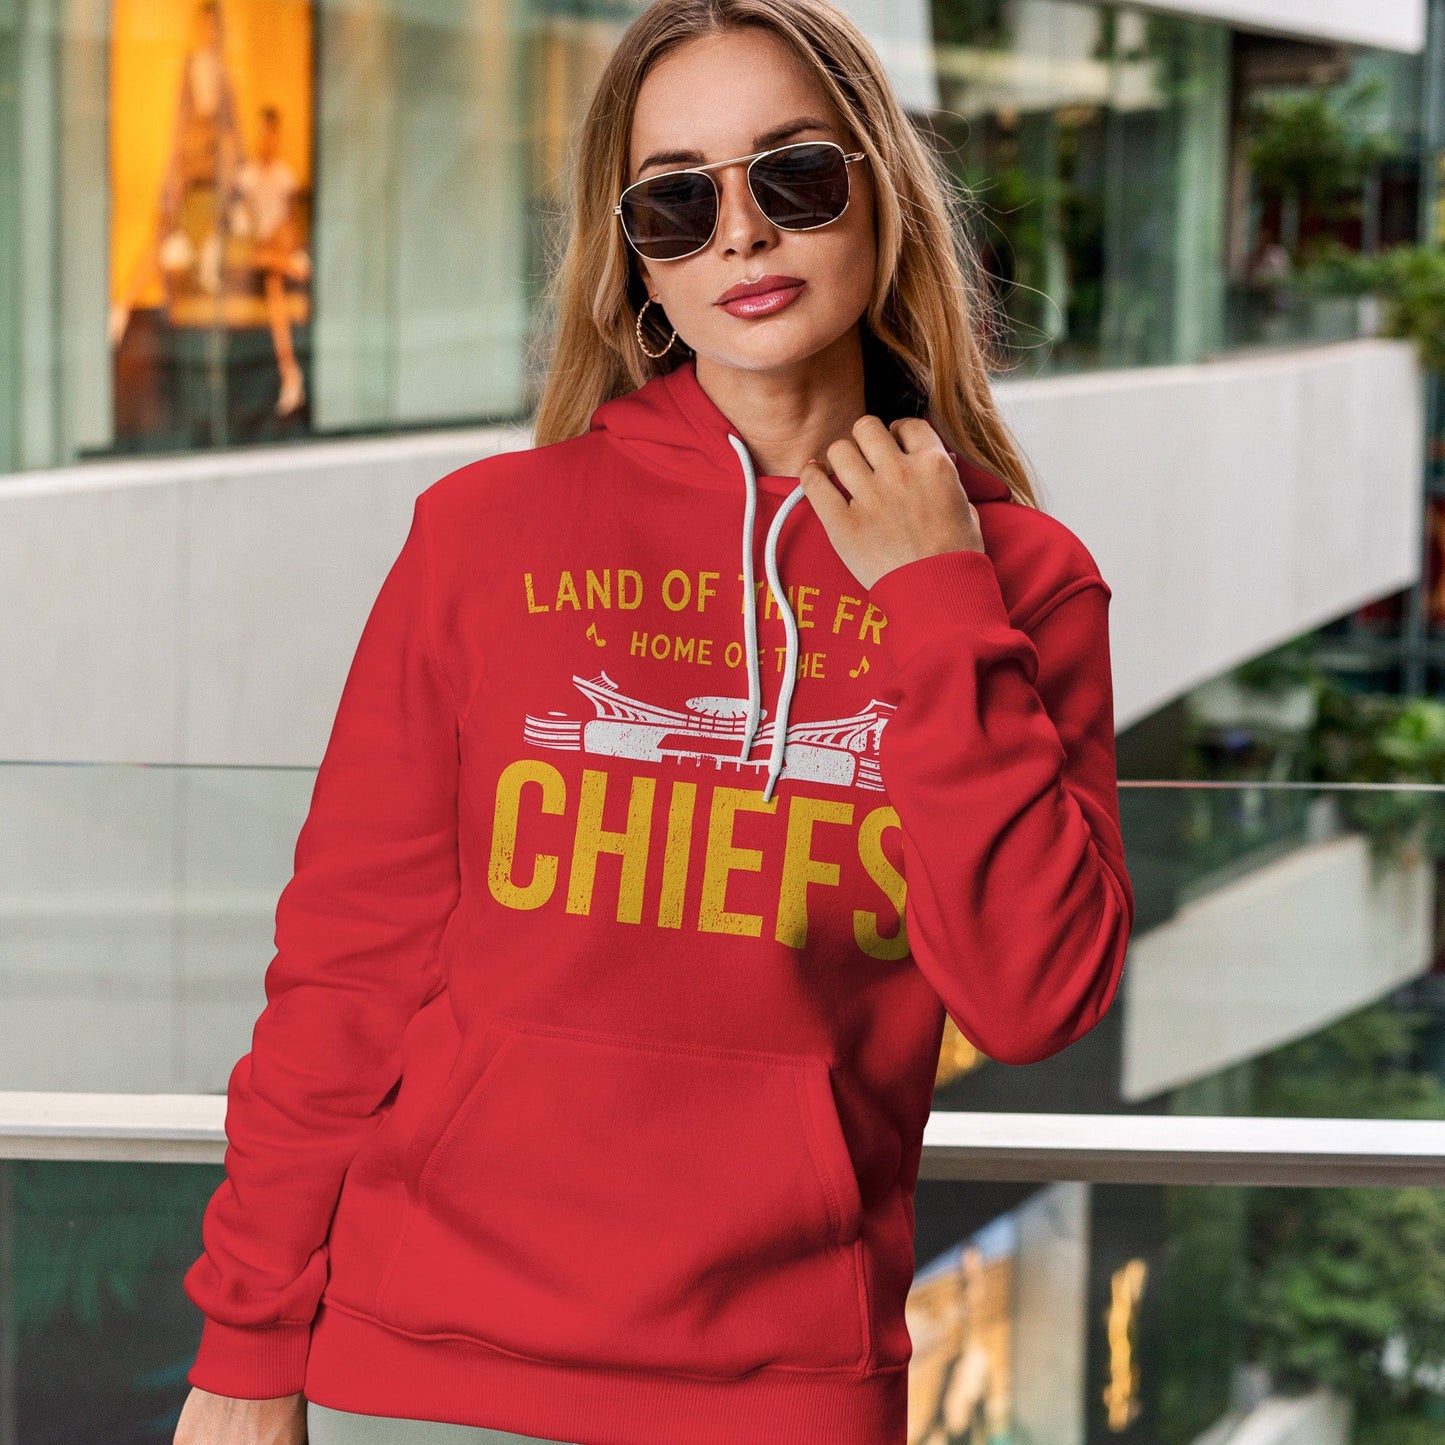 KC Swag | Kansas City Chiefs white/gold HOME OF THE CHIEFS on red sponge-fleece pullover hoodie worn by female model leaning on railing in shopping mall